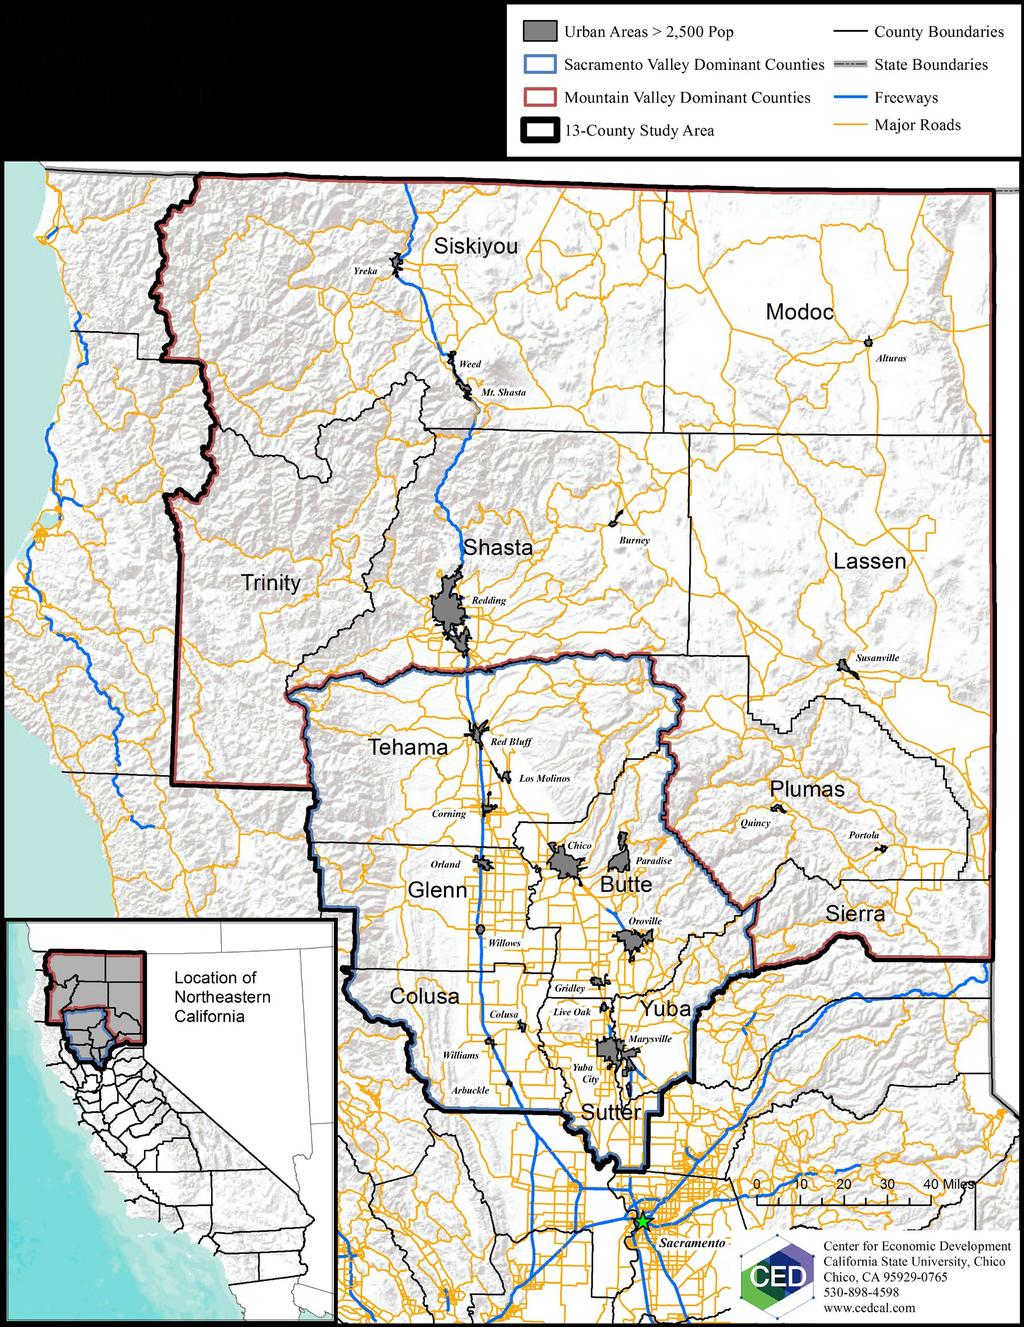 Figure 1: Northeastern California Agriculture Profile Study Area Map Northeastern California Agriculture Profile Study Area Map Siskiyou Yreka Urban Areas > 2,500 Pop County